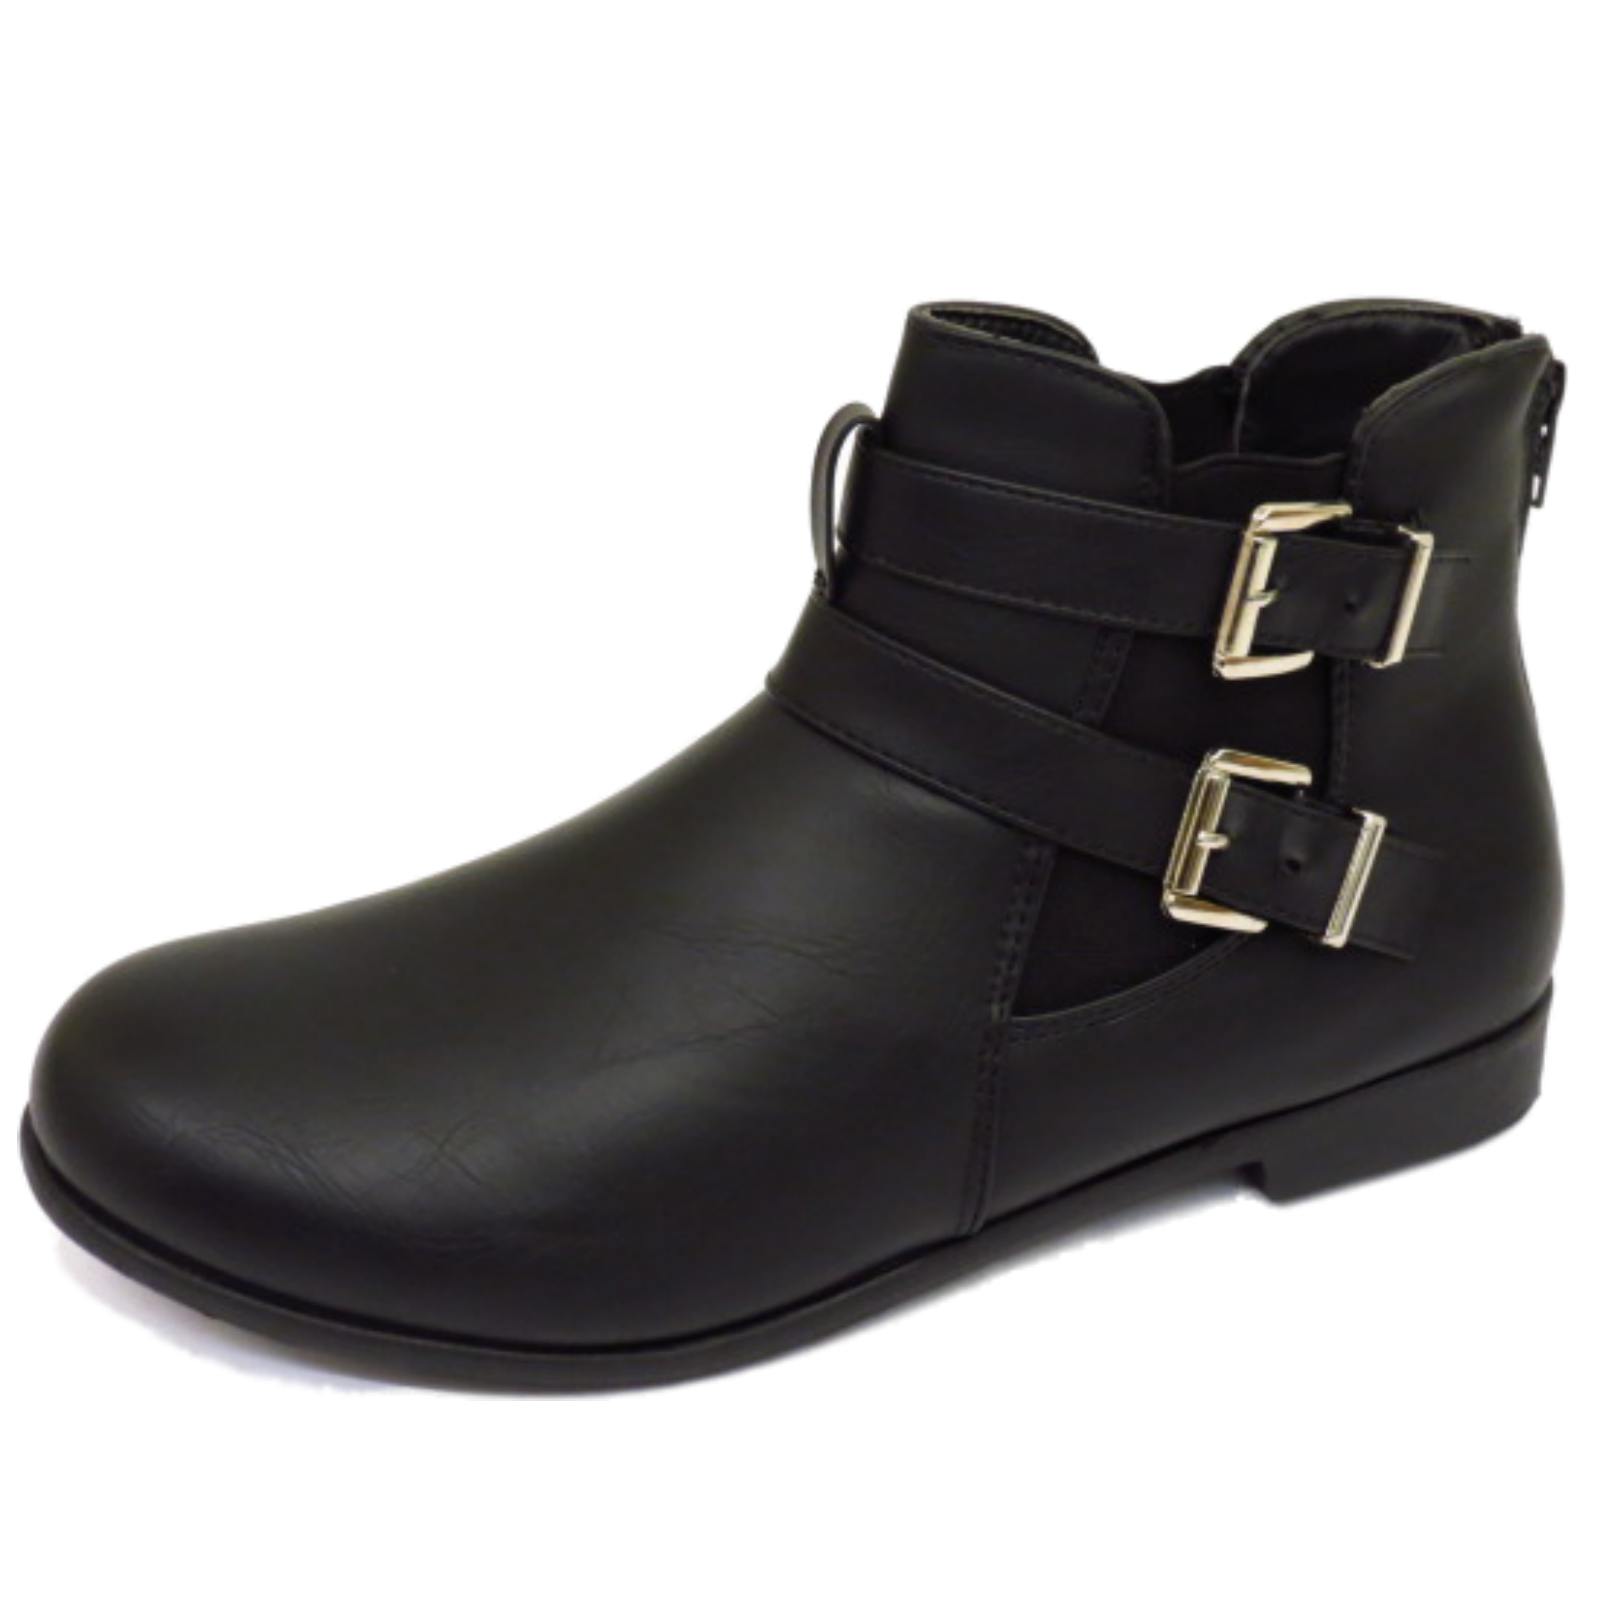 ladies flat ankle boots uk